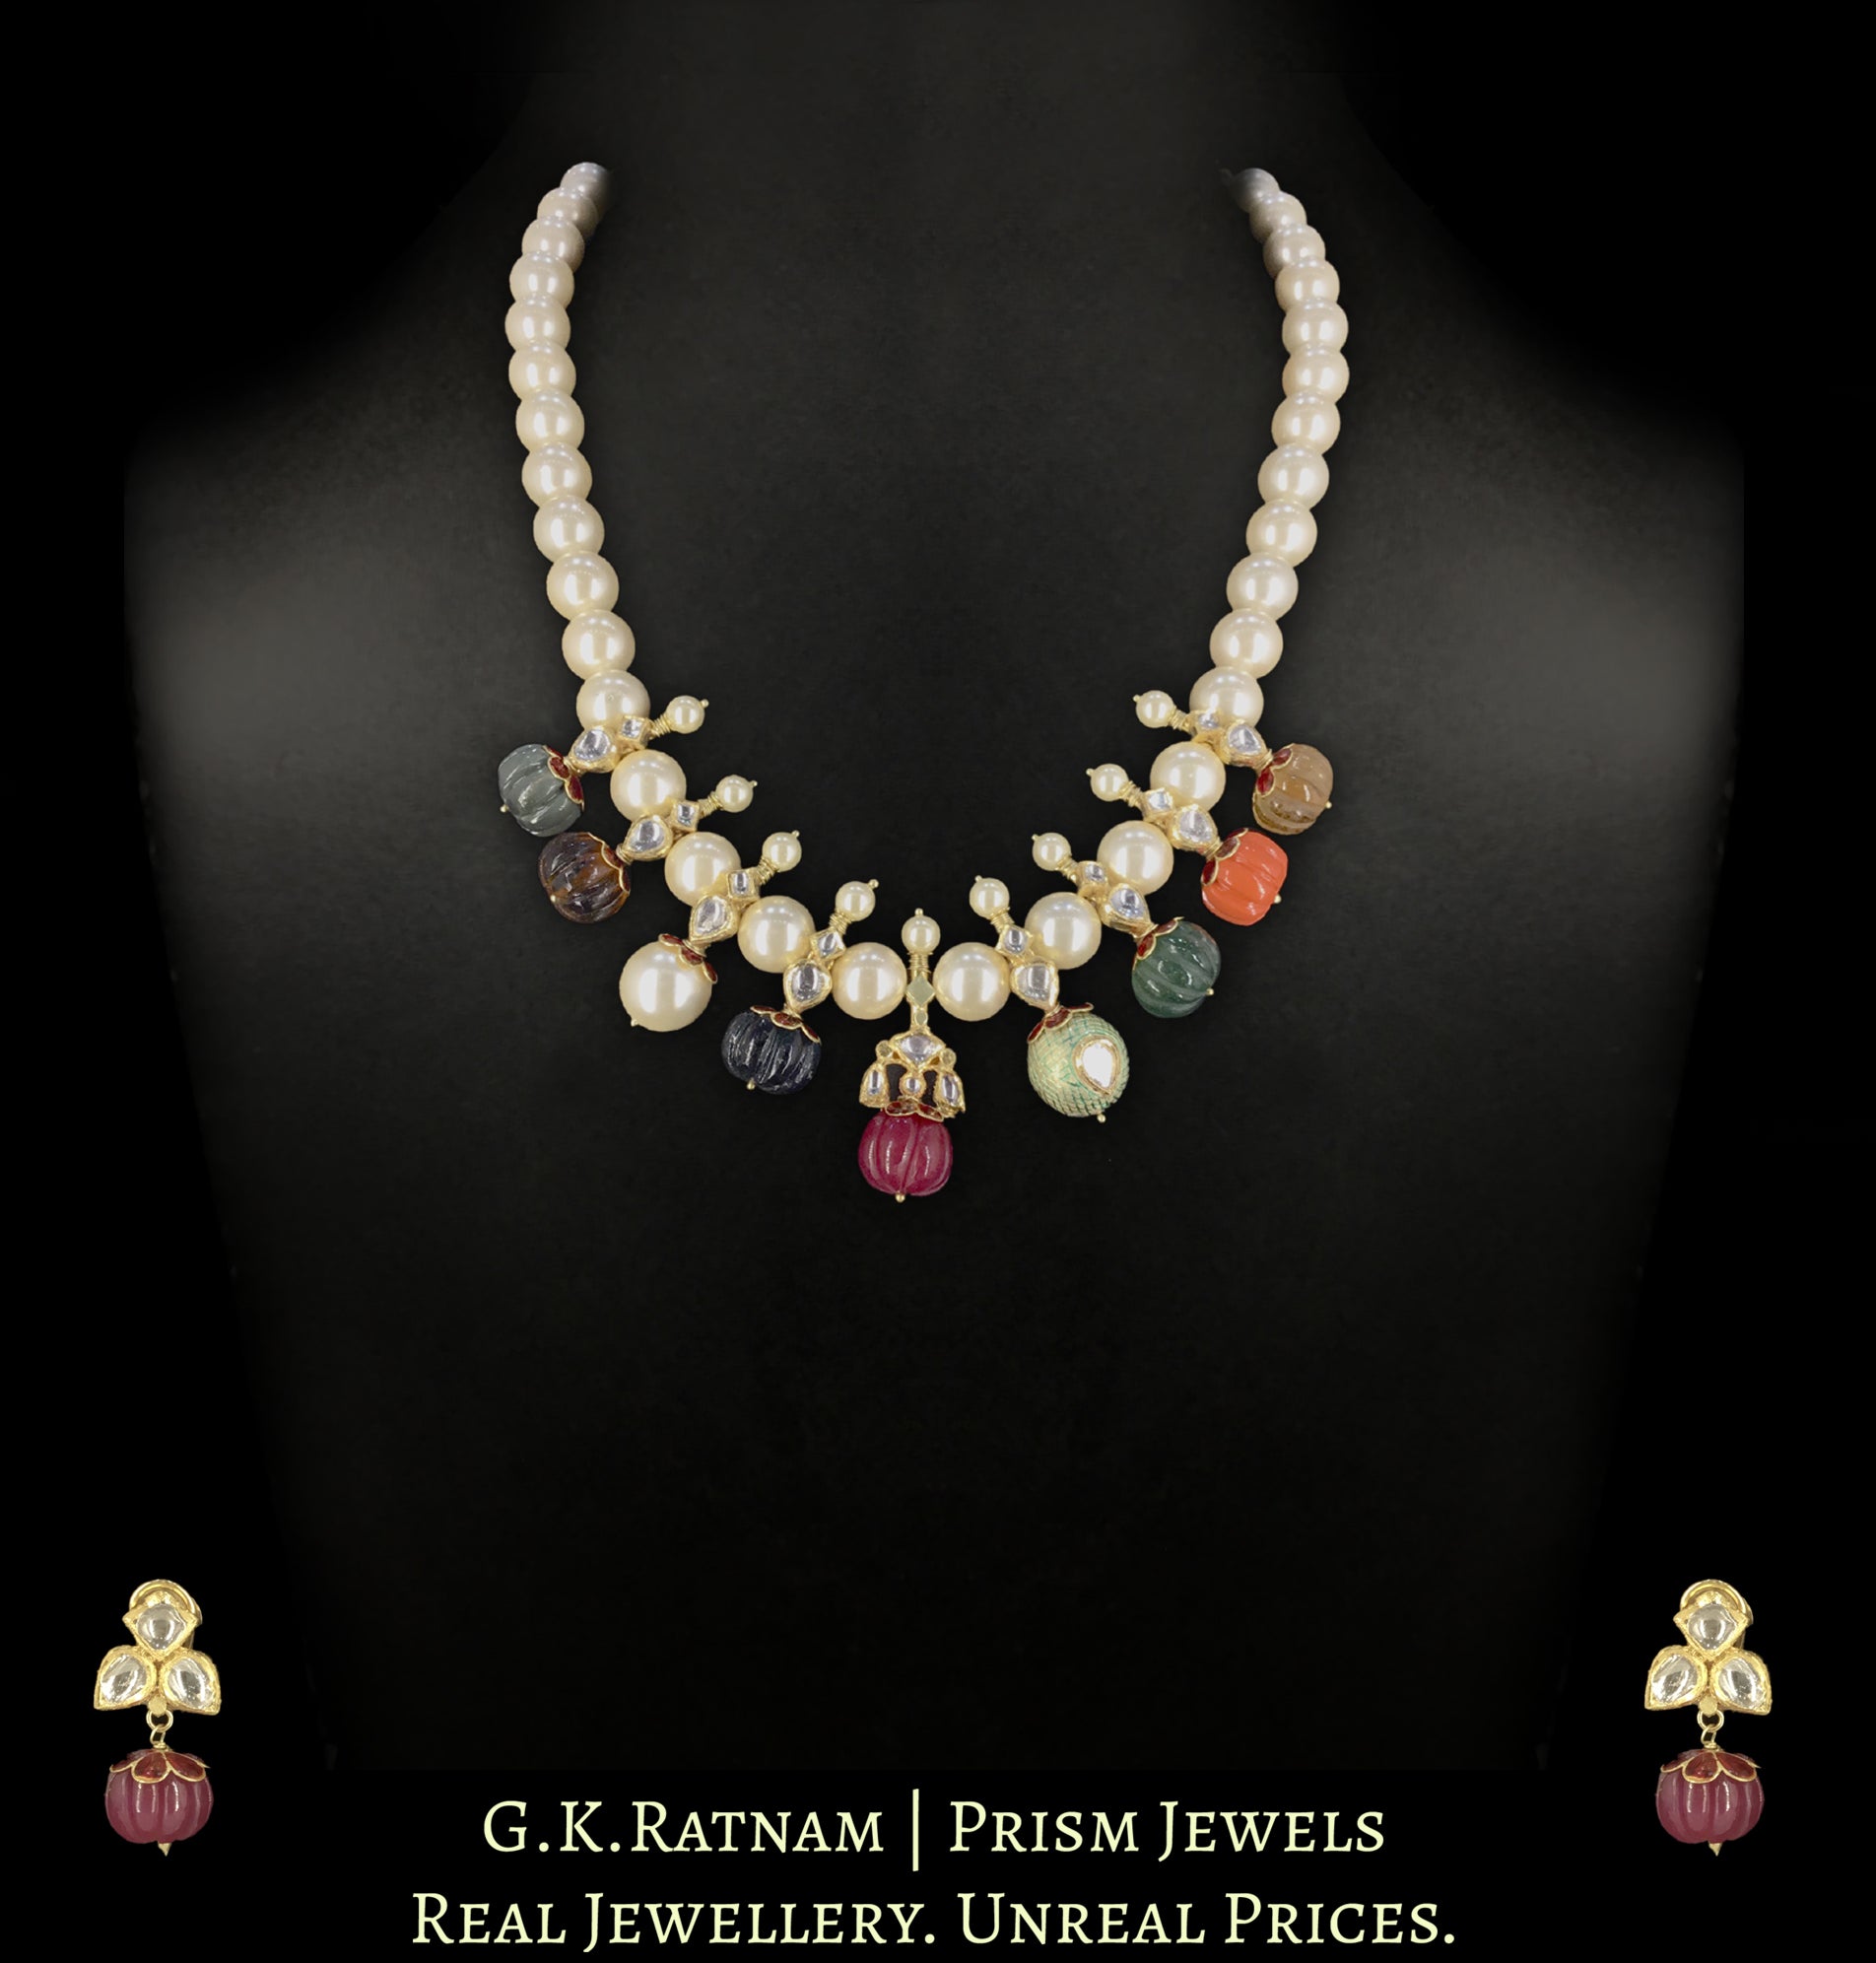 Navratna Necklace and Earrings in 22K Gold with Enamel - Tempus Gems